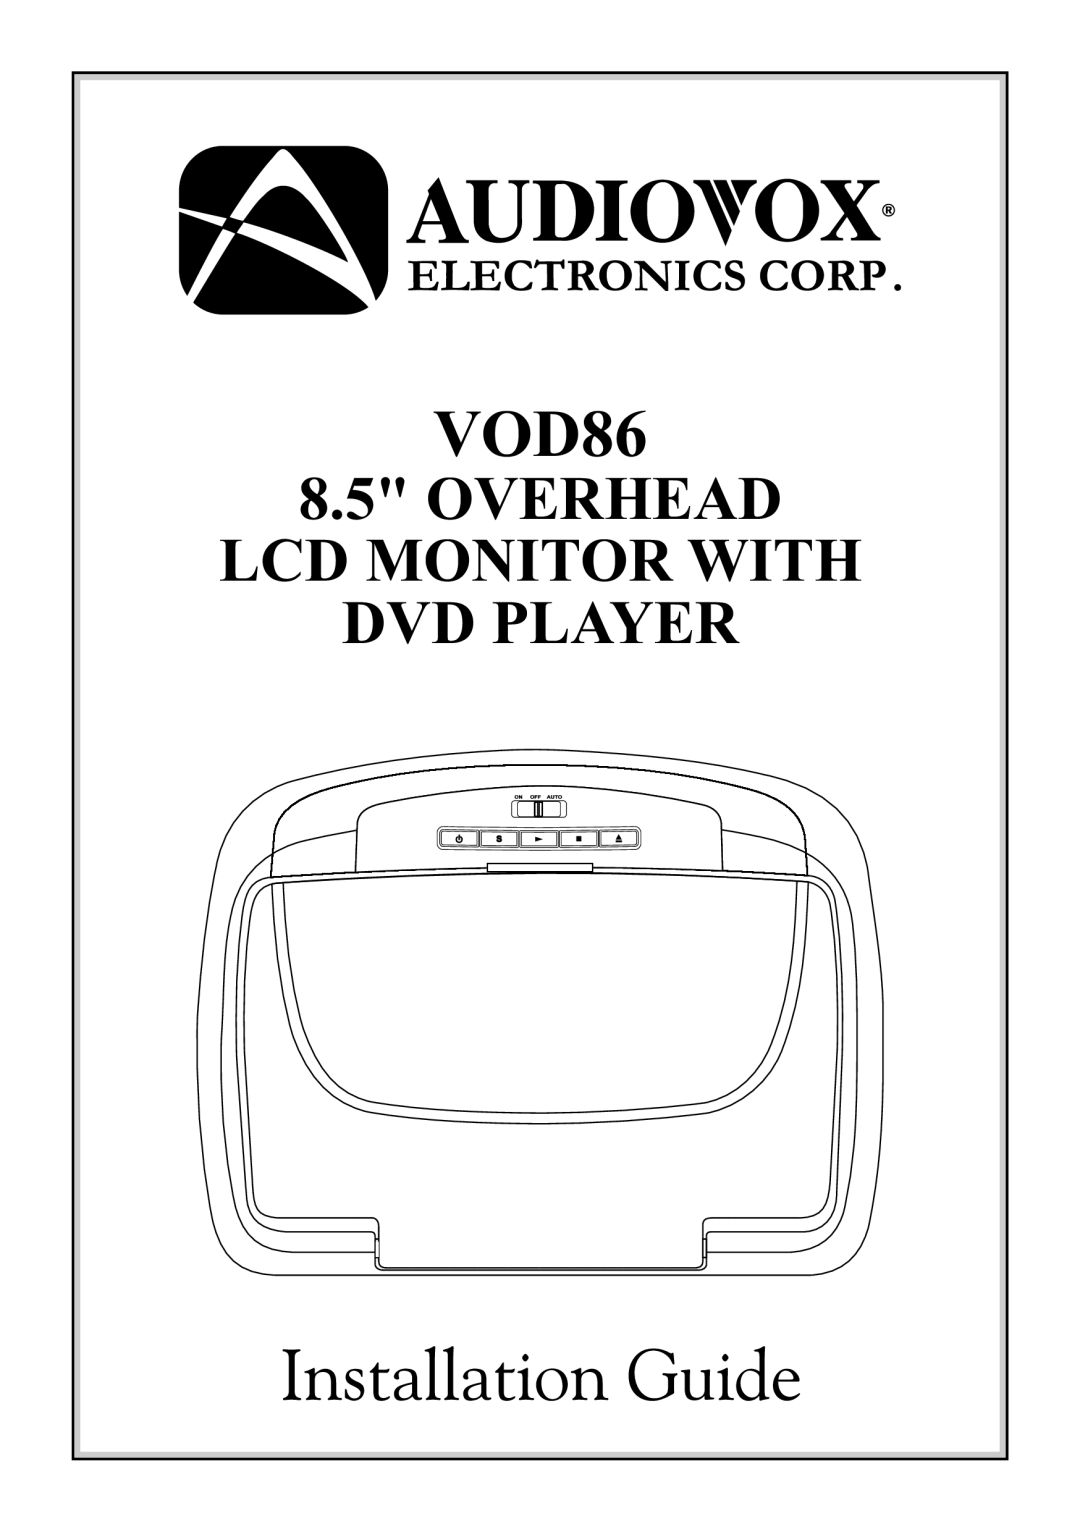 Audiovox VOD86 manual Overhead Lcd Monitor With Dvd Player 